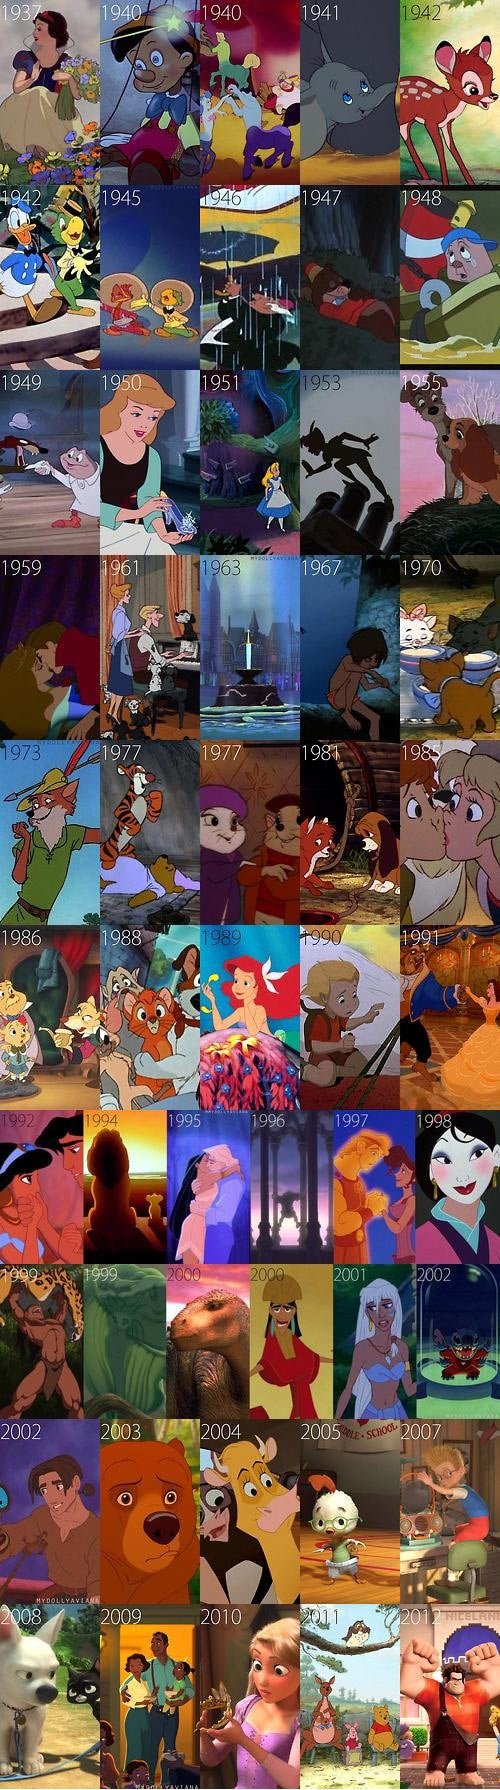 A Summary of All Disney Animated Films (Infographic)